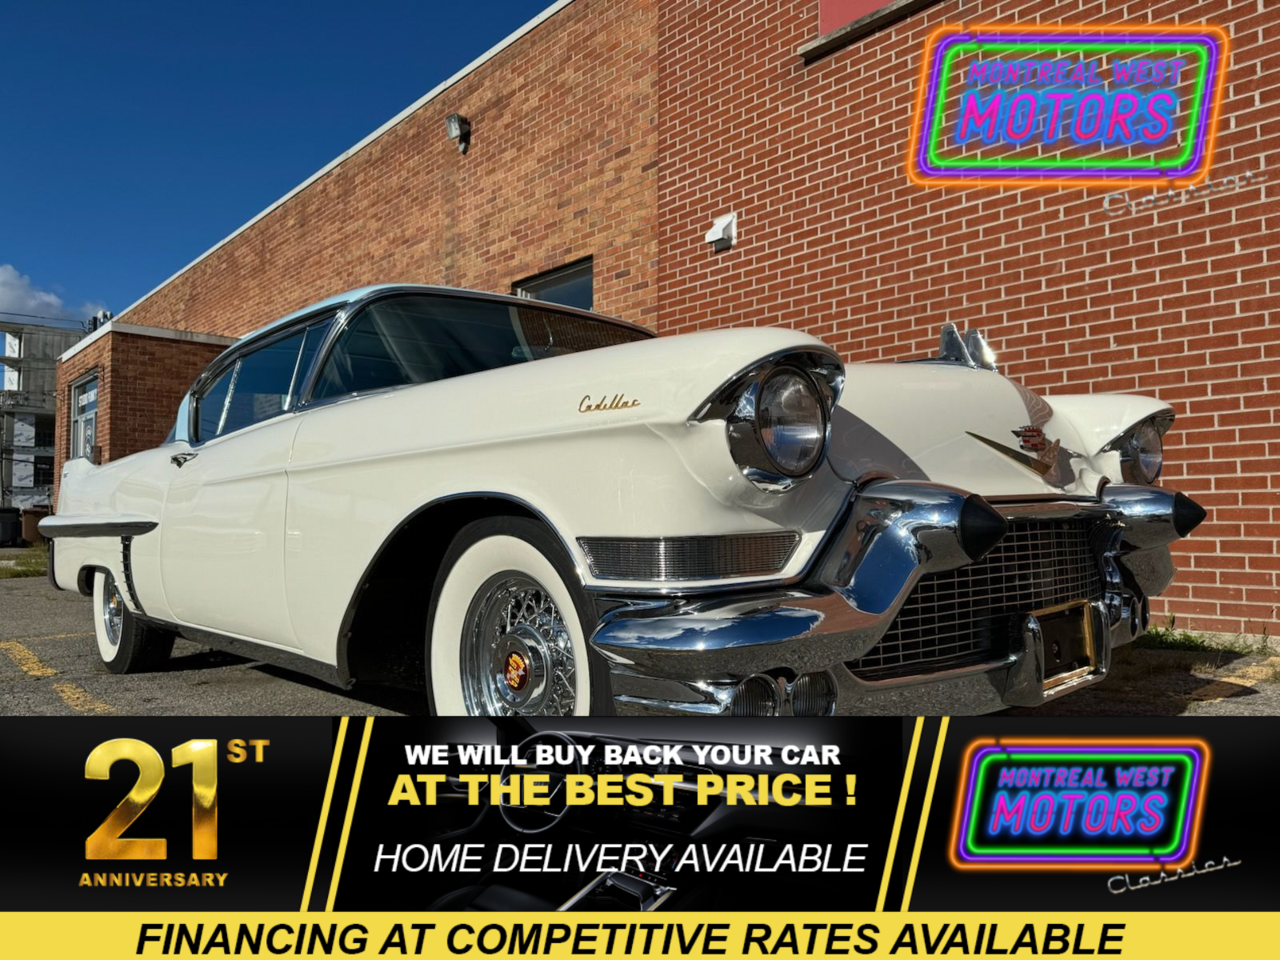 1957 Cadillac DeVille California Car !! LIKE NEW! MINT 45,000 mi. ONLY /